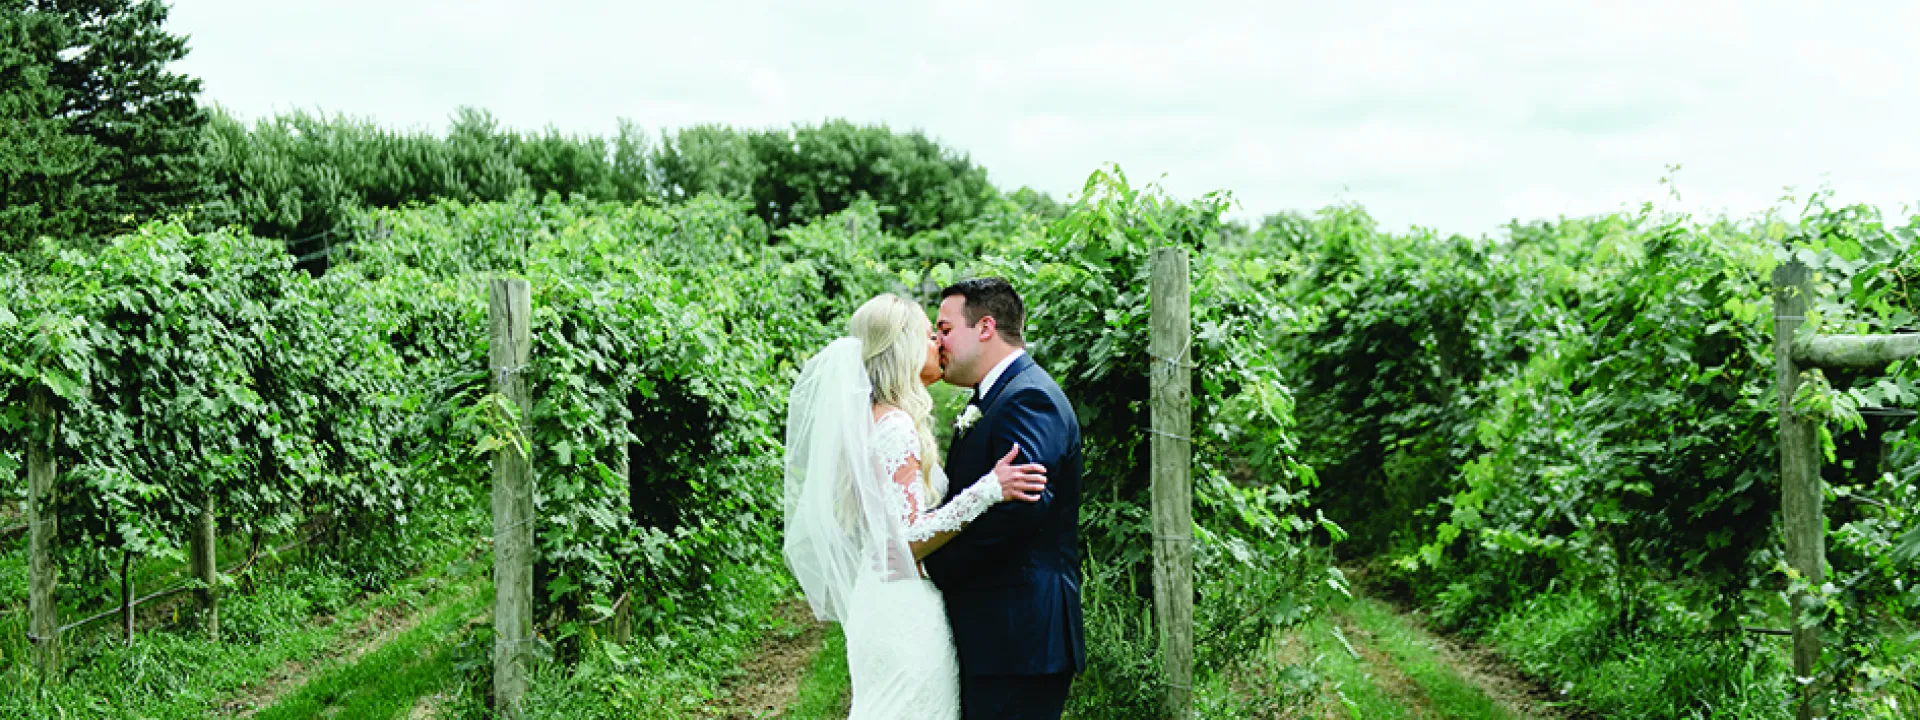 Tom and Chelsey kiss on their wedding day at Round Lake Vineyards & Winery